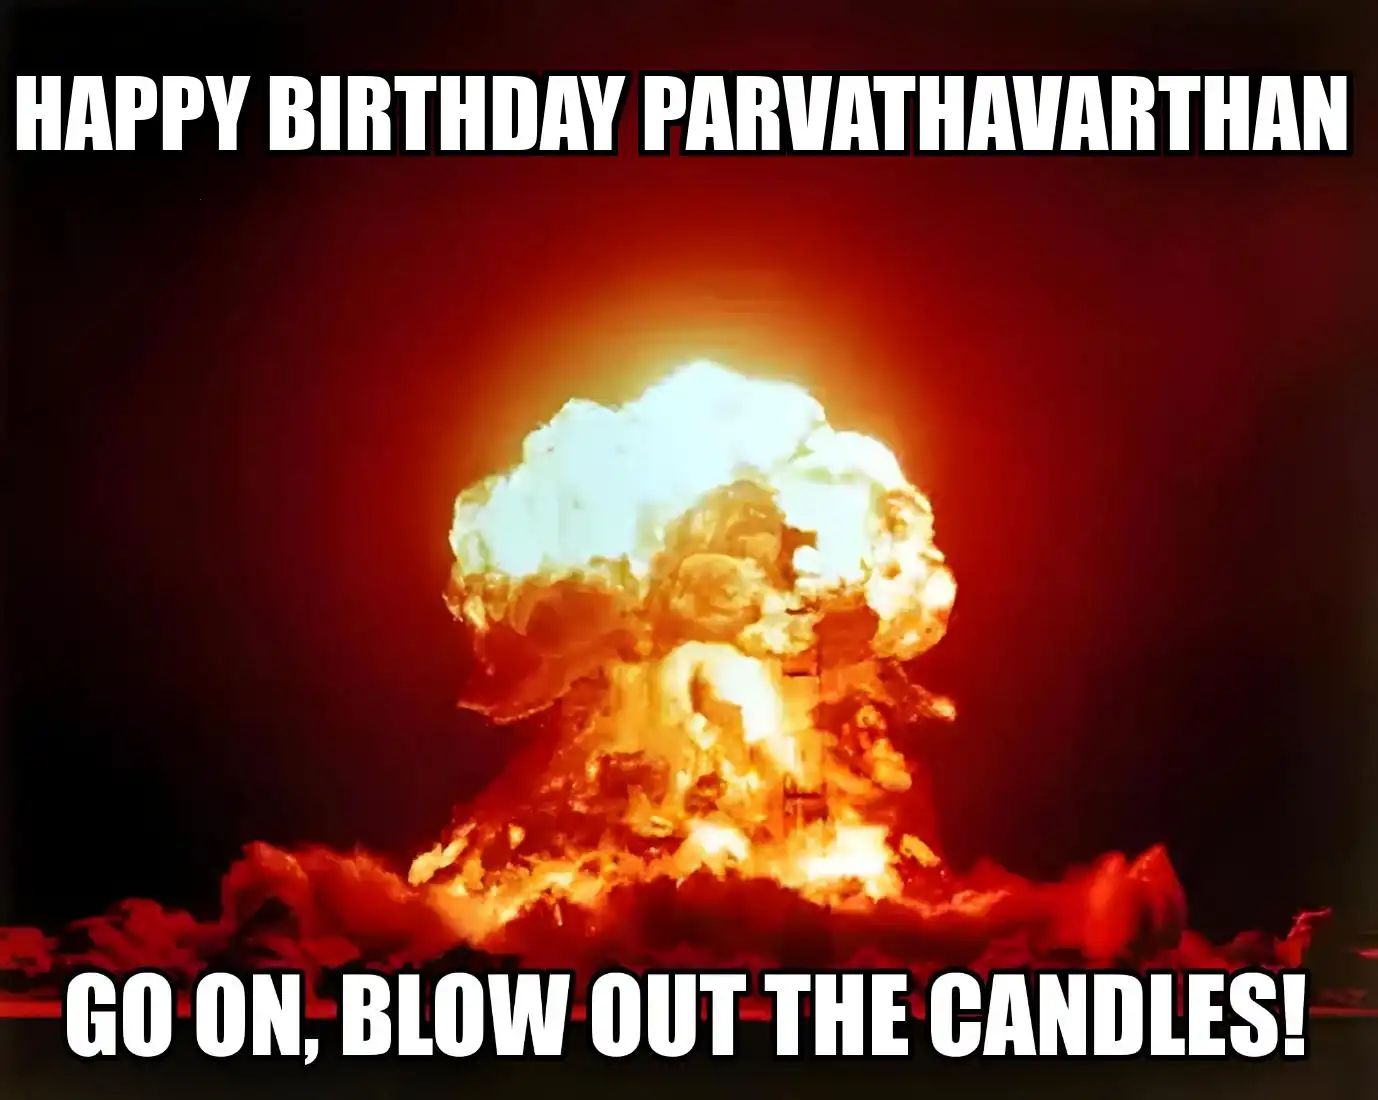 Happy Birthday Parvathavarthan Go On Blow Out The Candles Meme